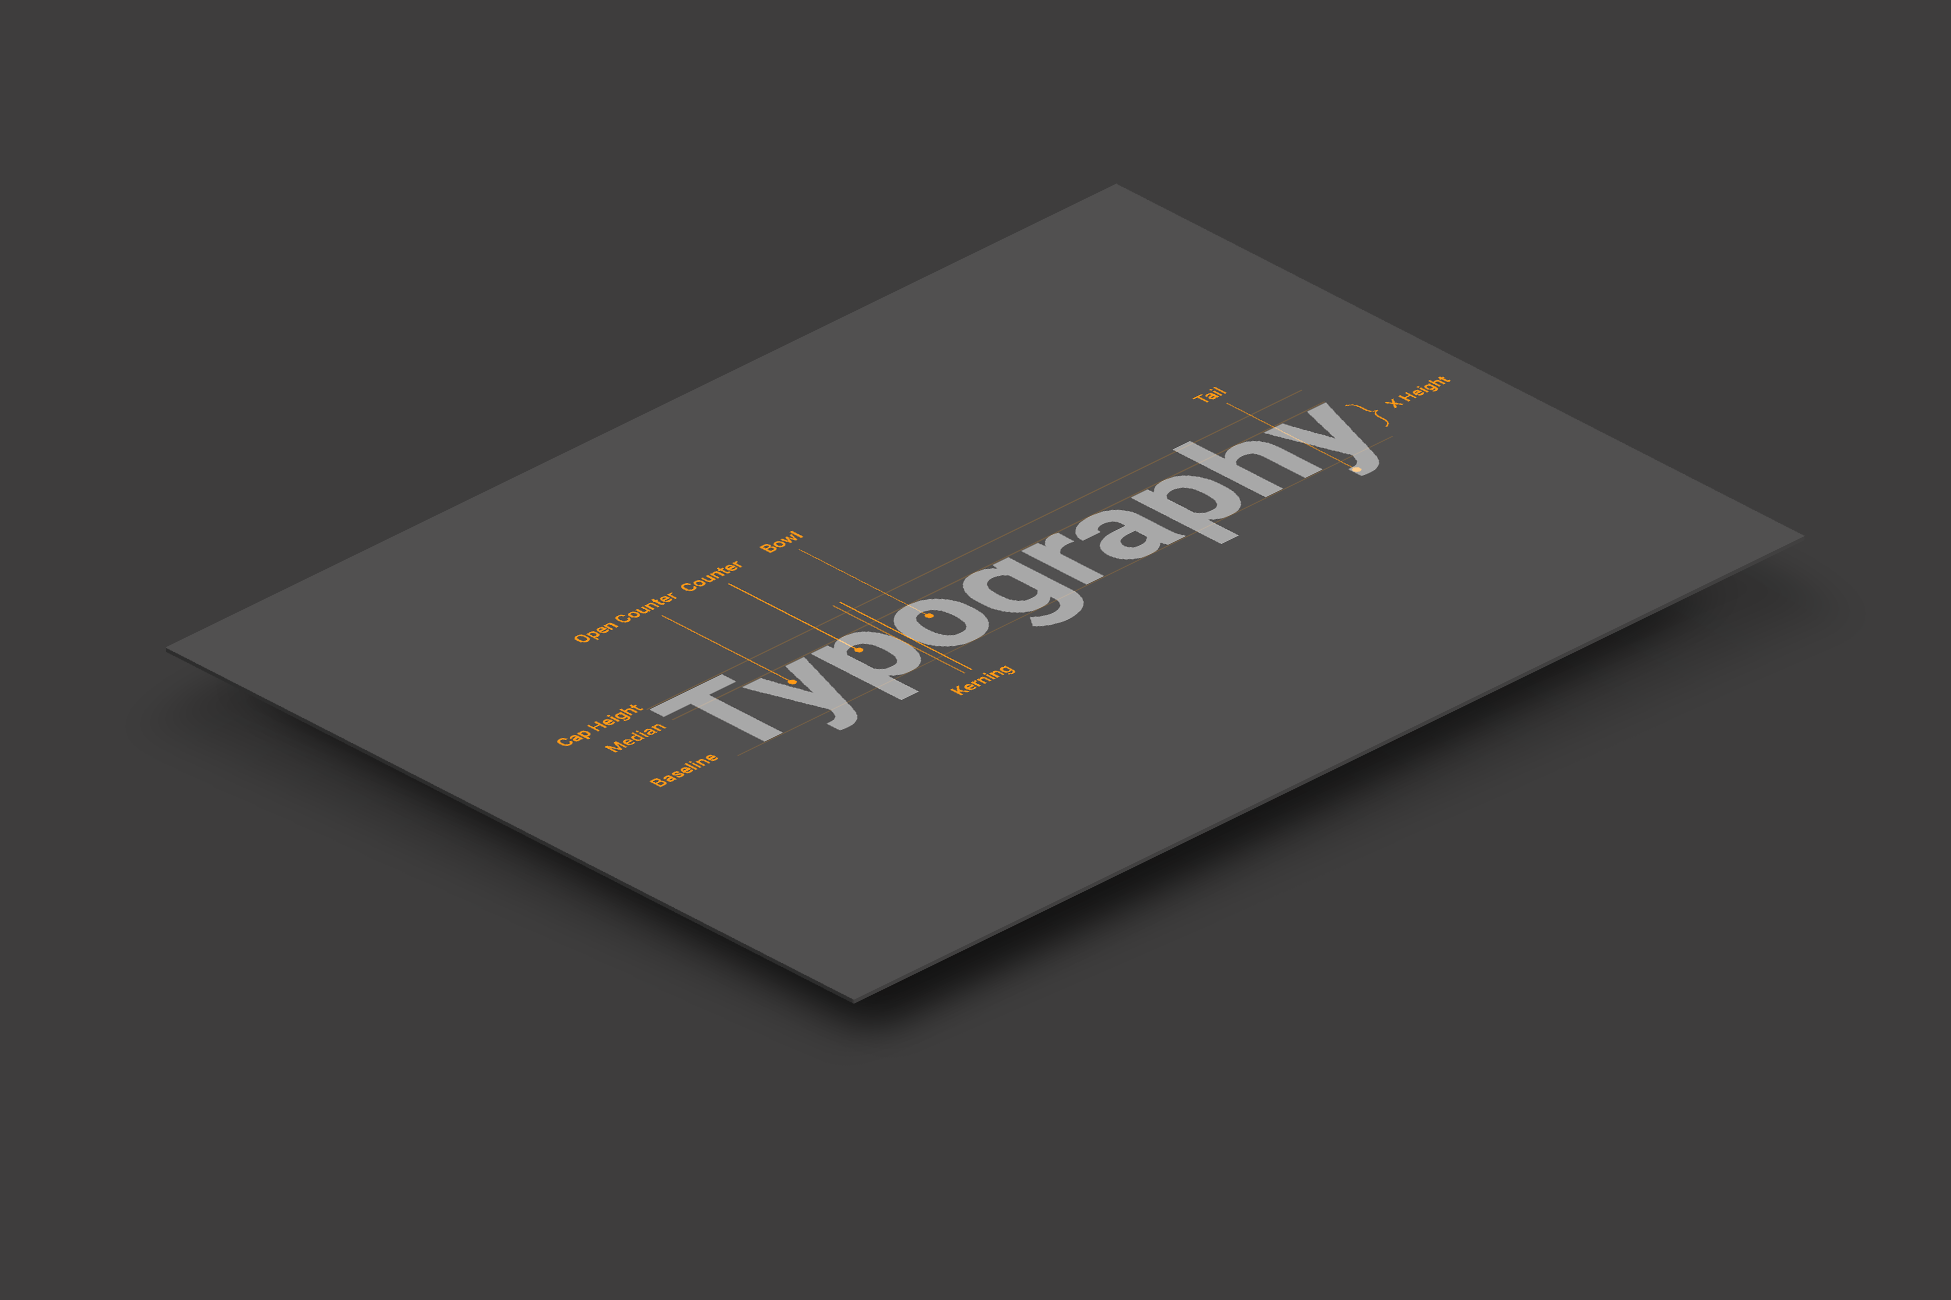 Typography basics and yips for User Interface (UI) design – Part 2